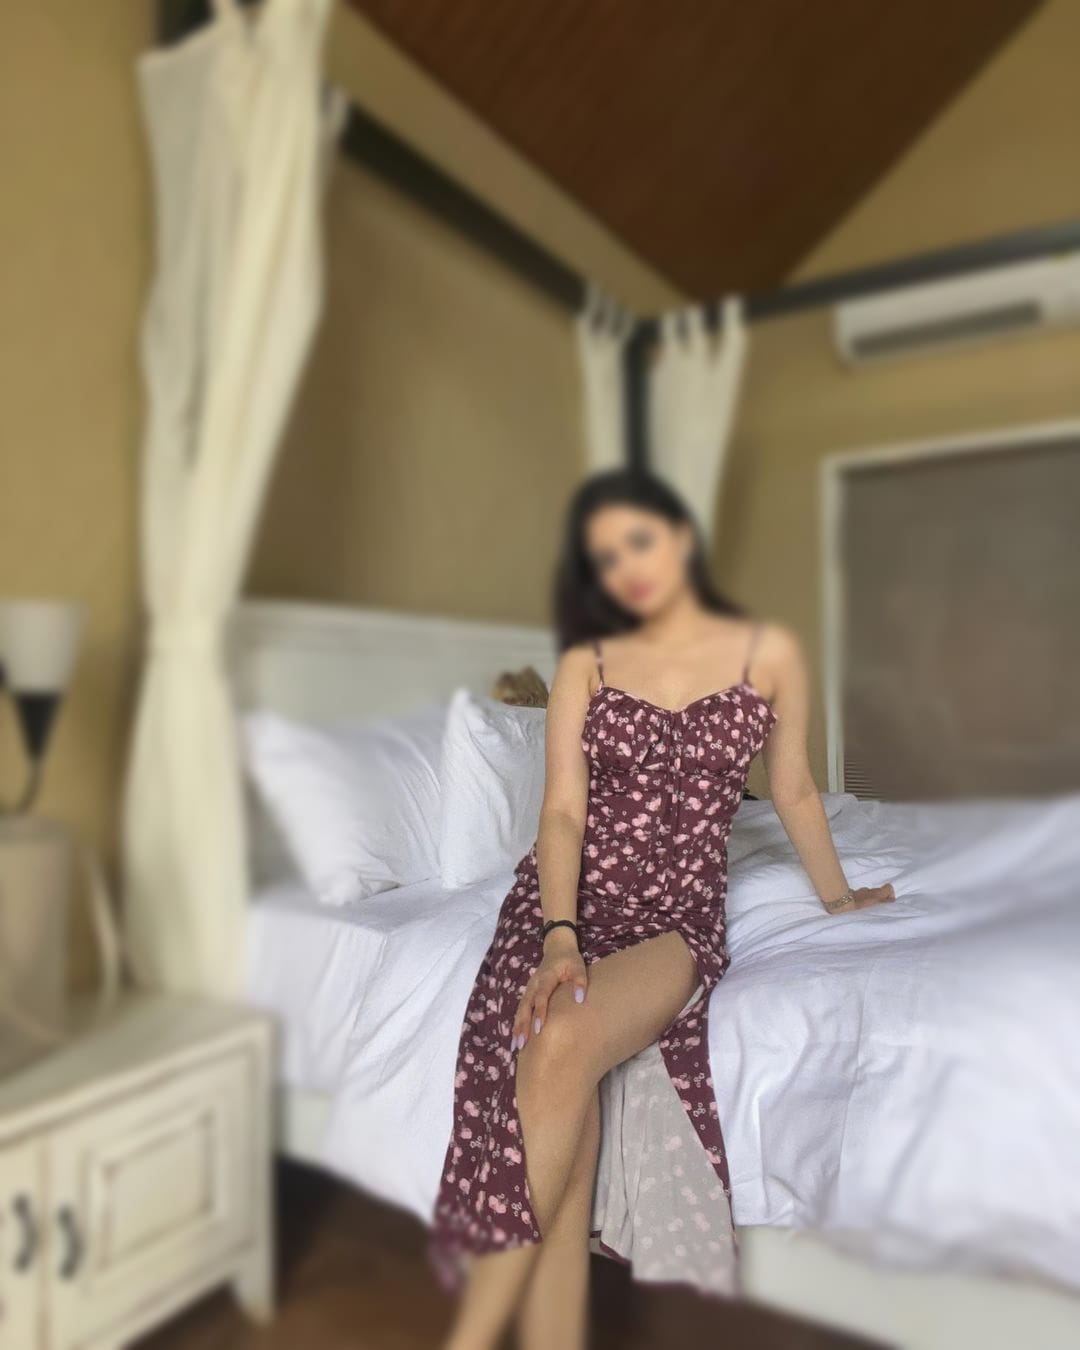 PANVEL🔥HOT&SEXY BEST CALL GIRL AVAILABLE SAFE HOTEL&HOME